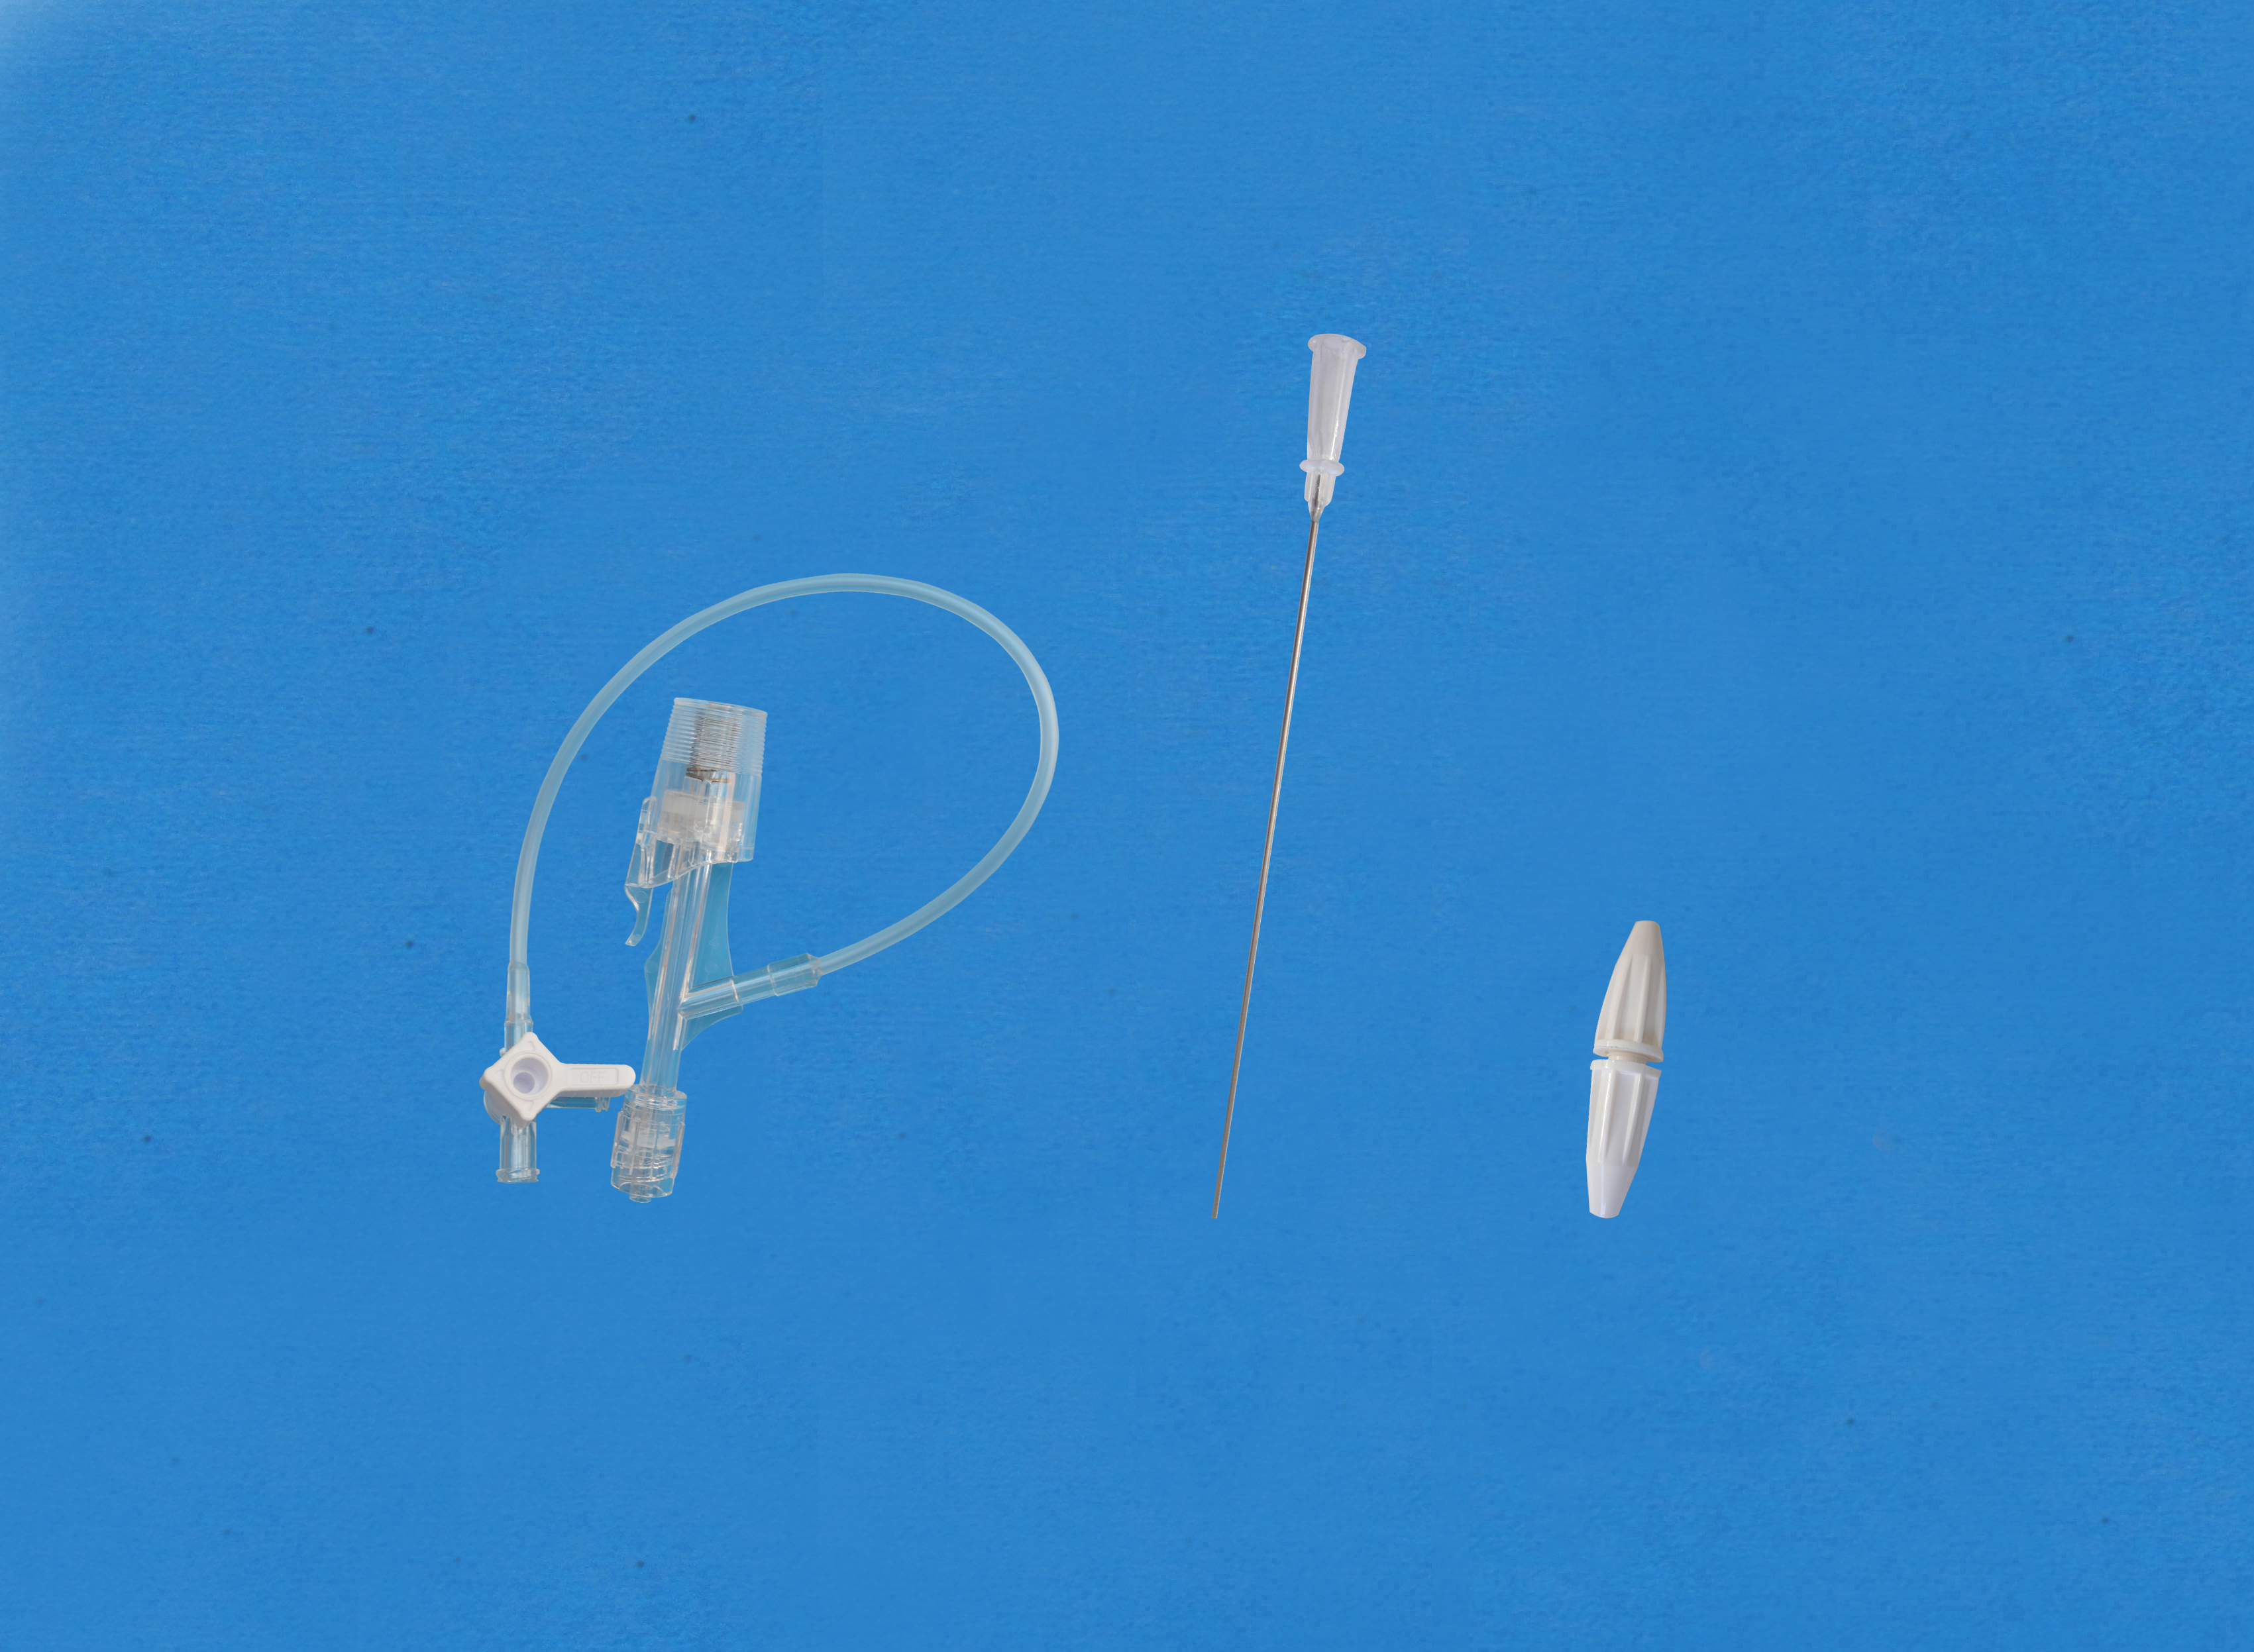 Haemostatic valves, Y click, Sideon Tubing and Stopcock, Insertion Tool with Small Hub, White/Plastic Torquer